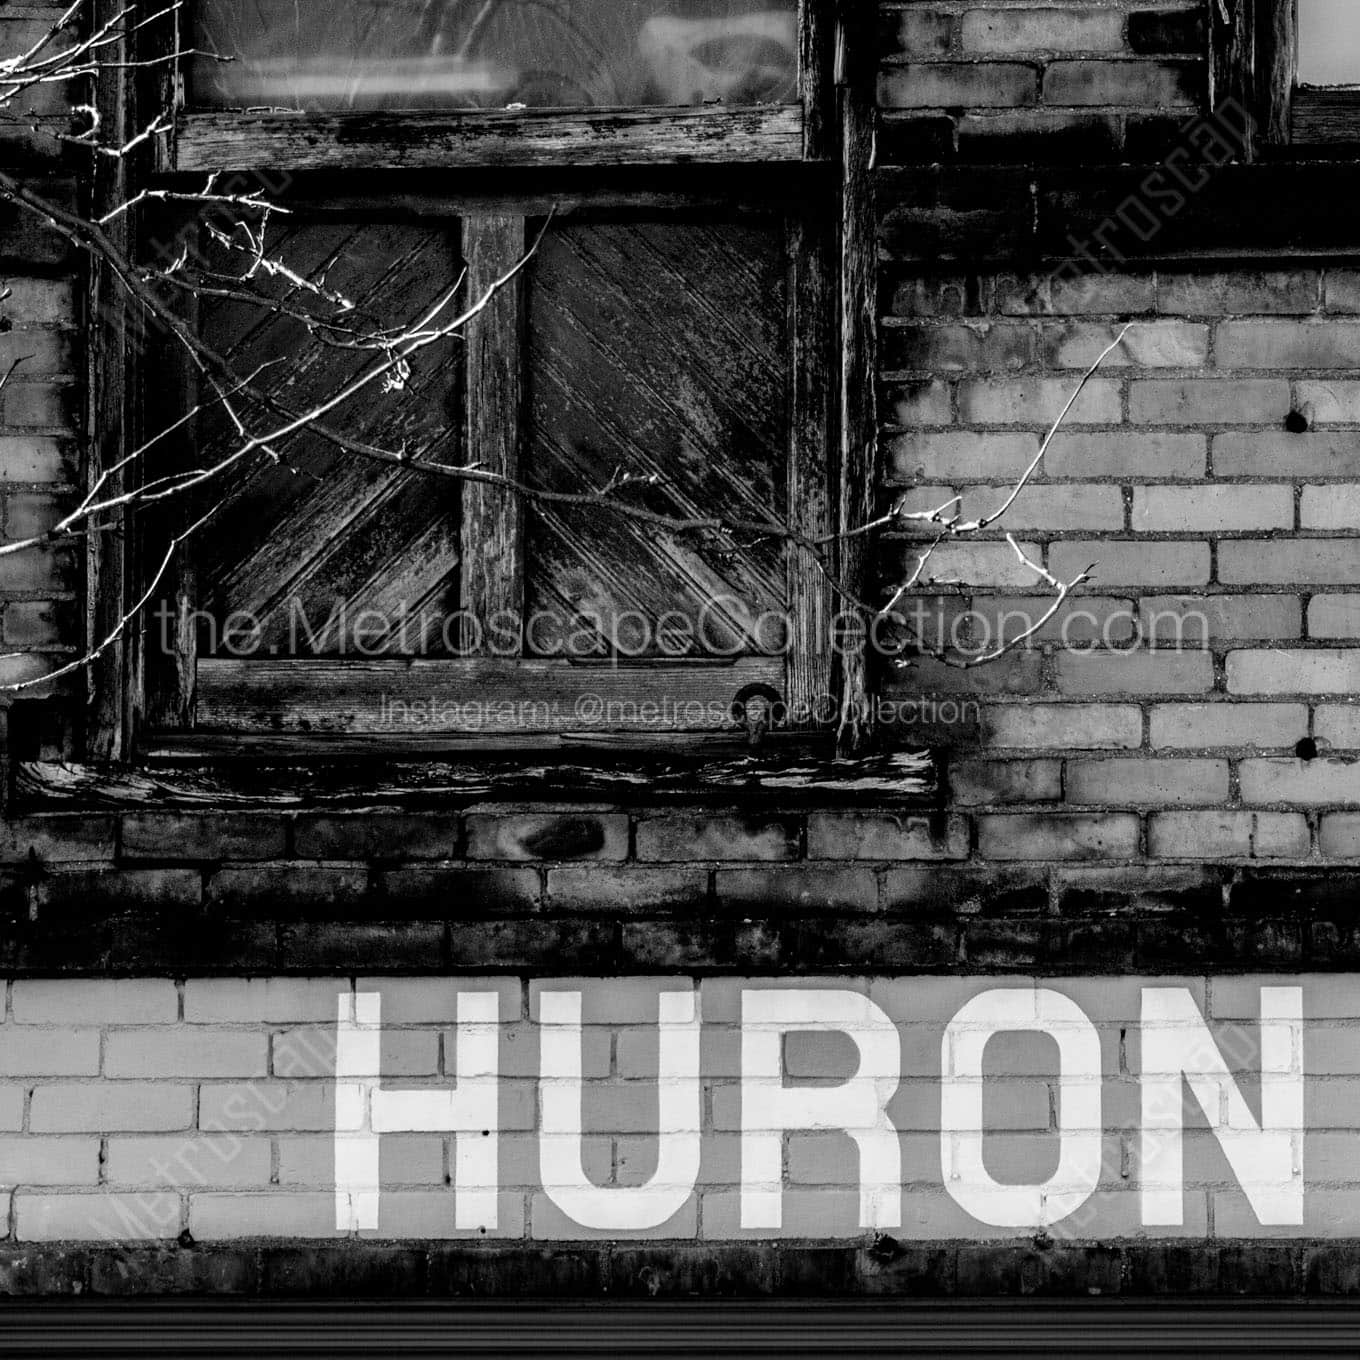 huron street sign painted on building Black & White Office Art